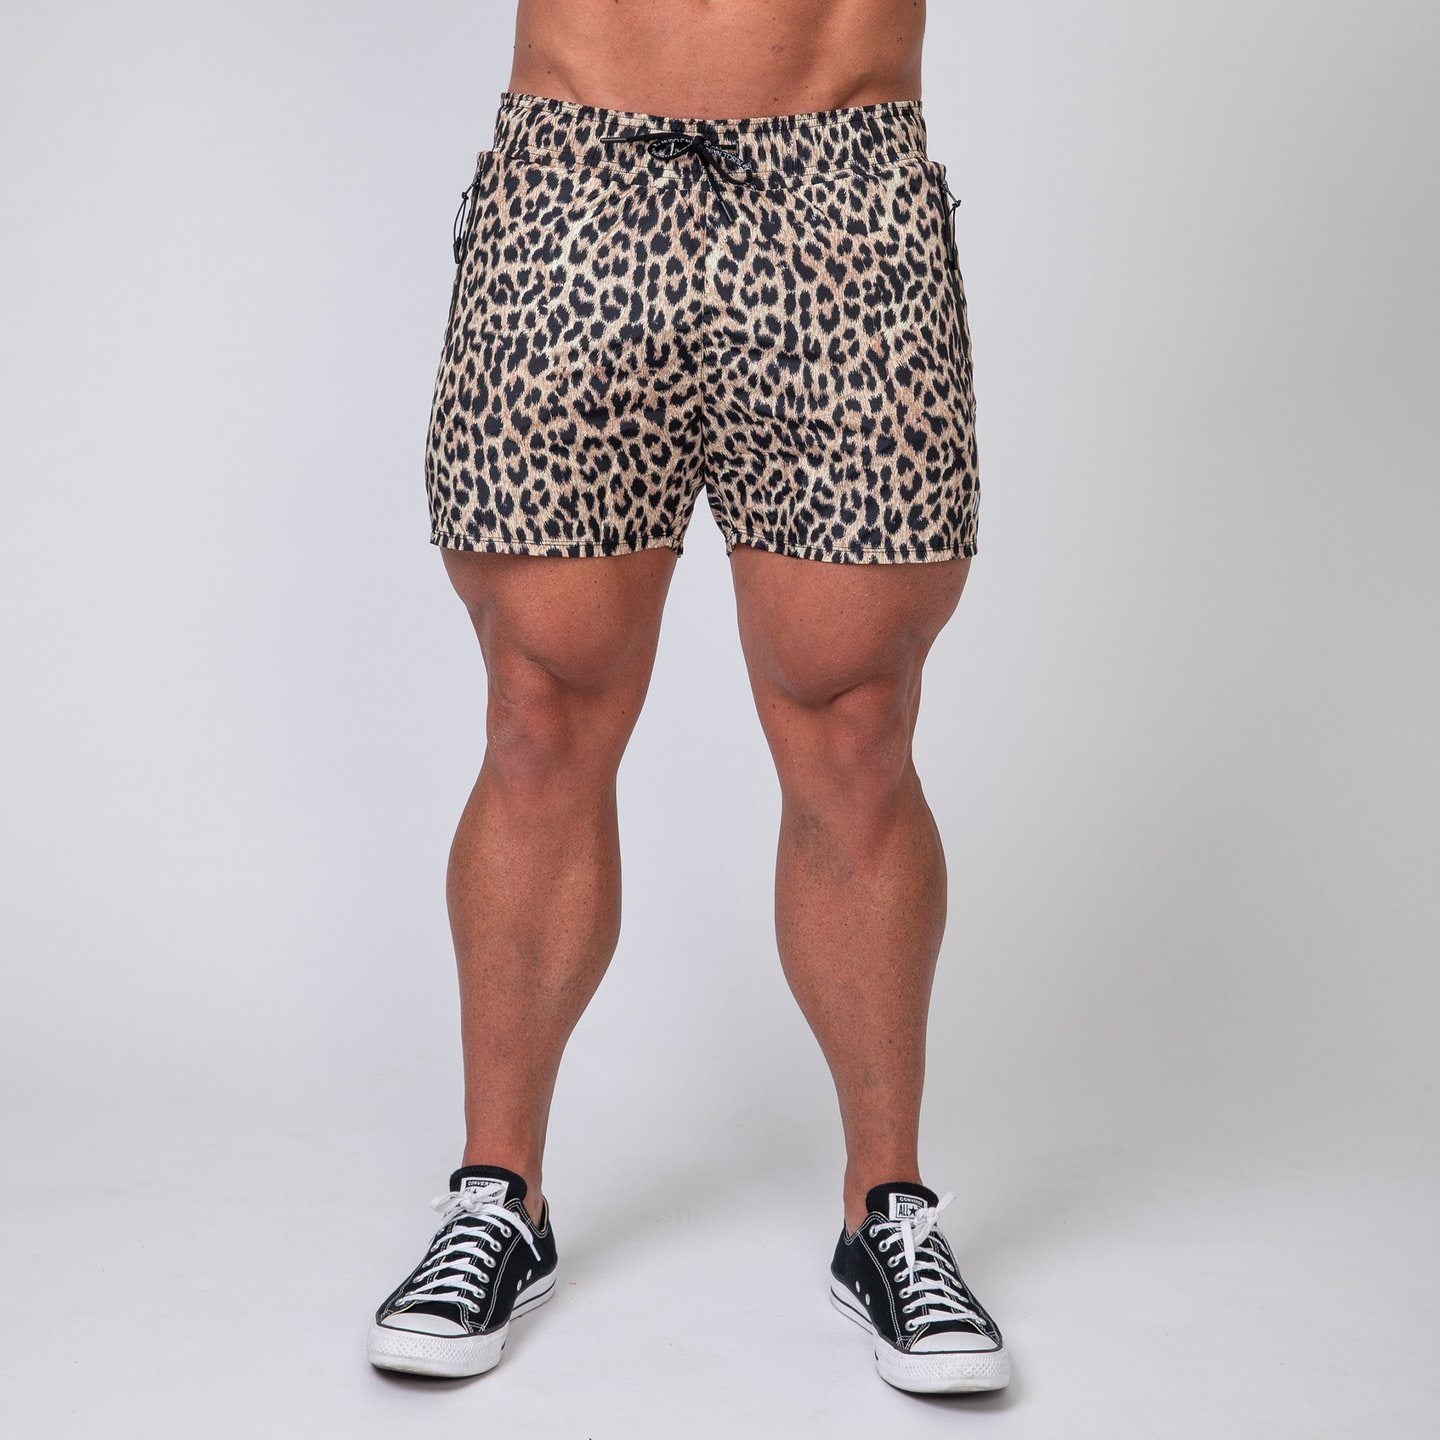 5 Day Leopard Workout Shorts for Beginner